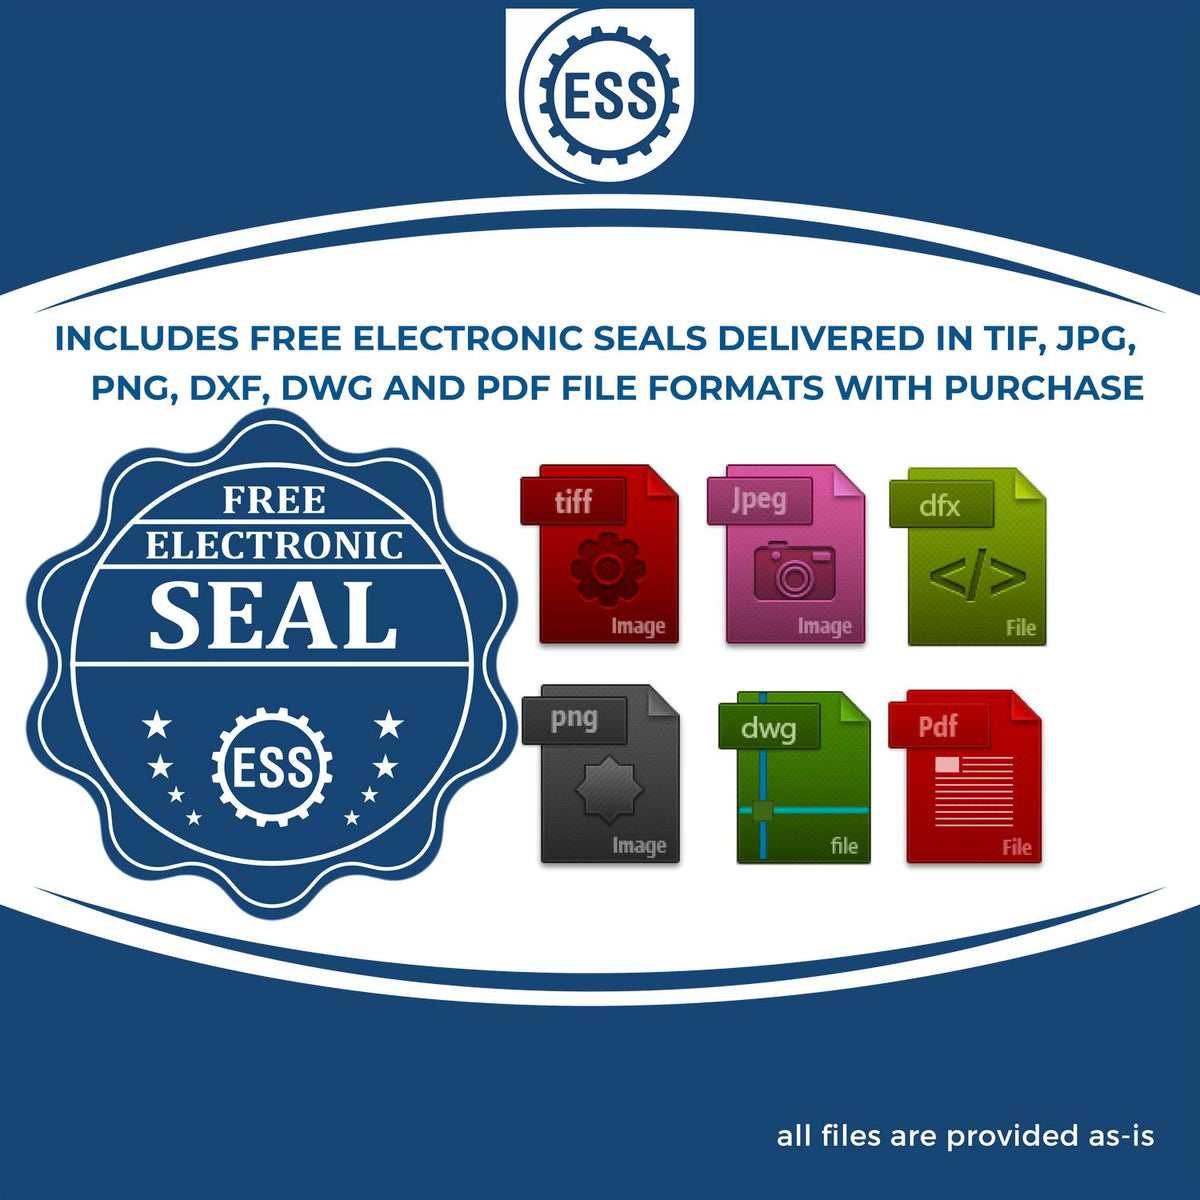 An infographic for the free electronic seal for the Gift Hawaii Land Surveyor Seal illustrating the different file type icons such as DXF, DWG, TIF, JPG and PNG.